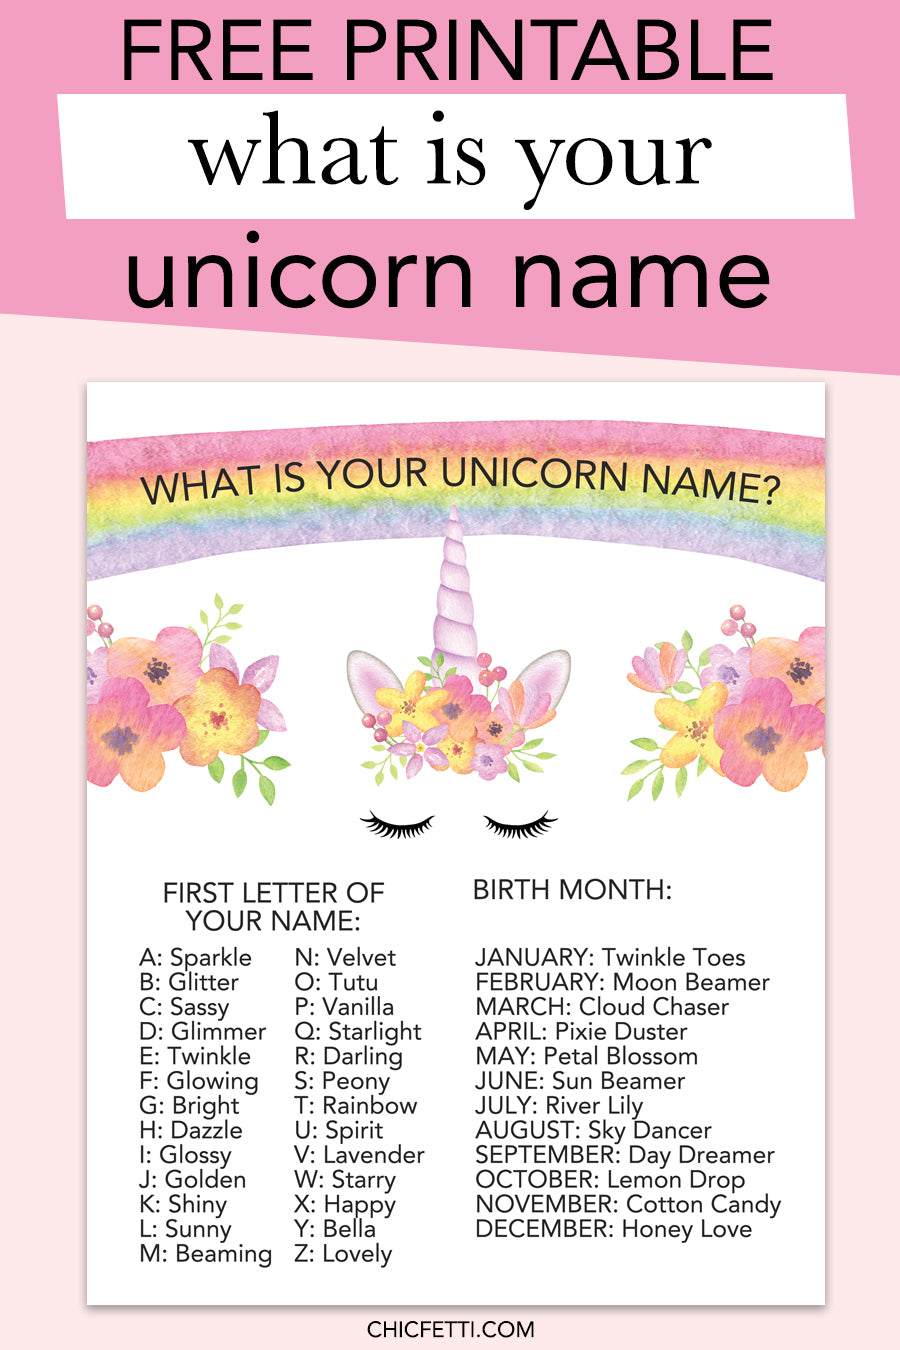 What Is Your Unicorn Name Free Printable - Chicfetti